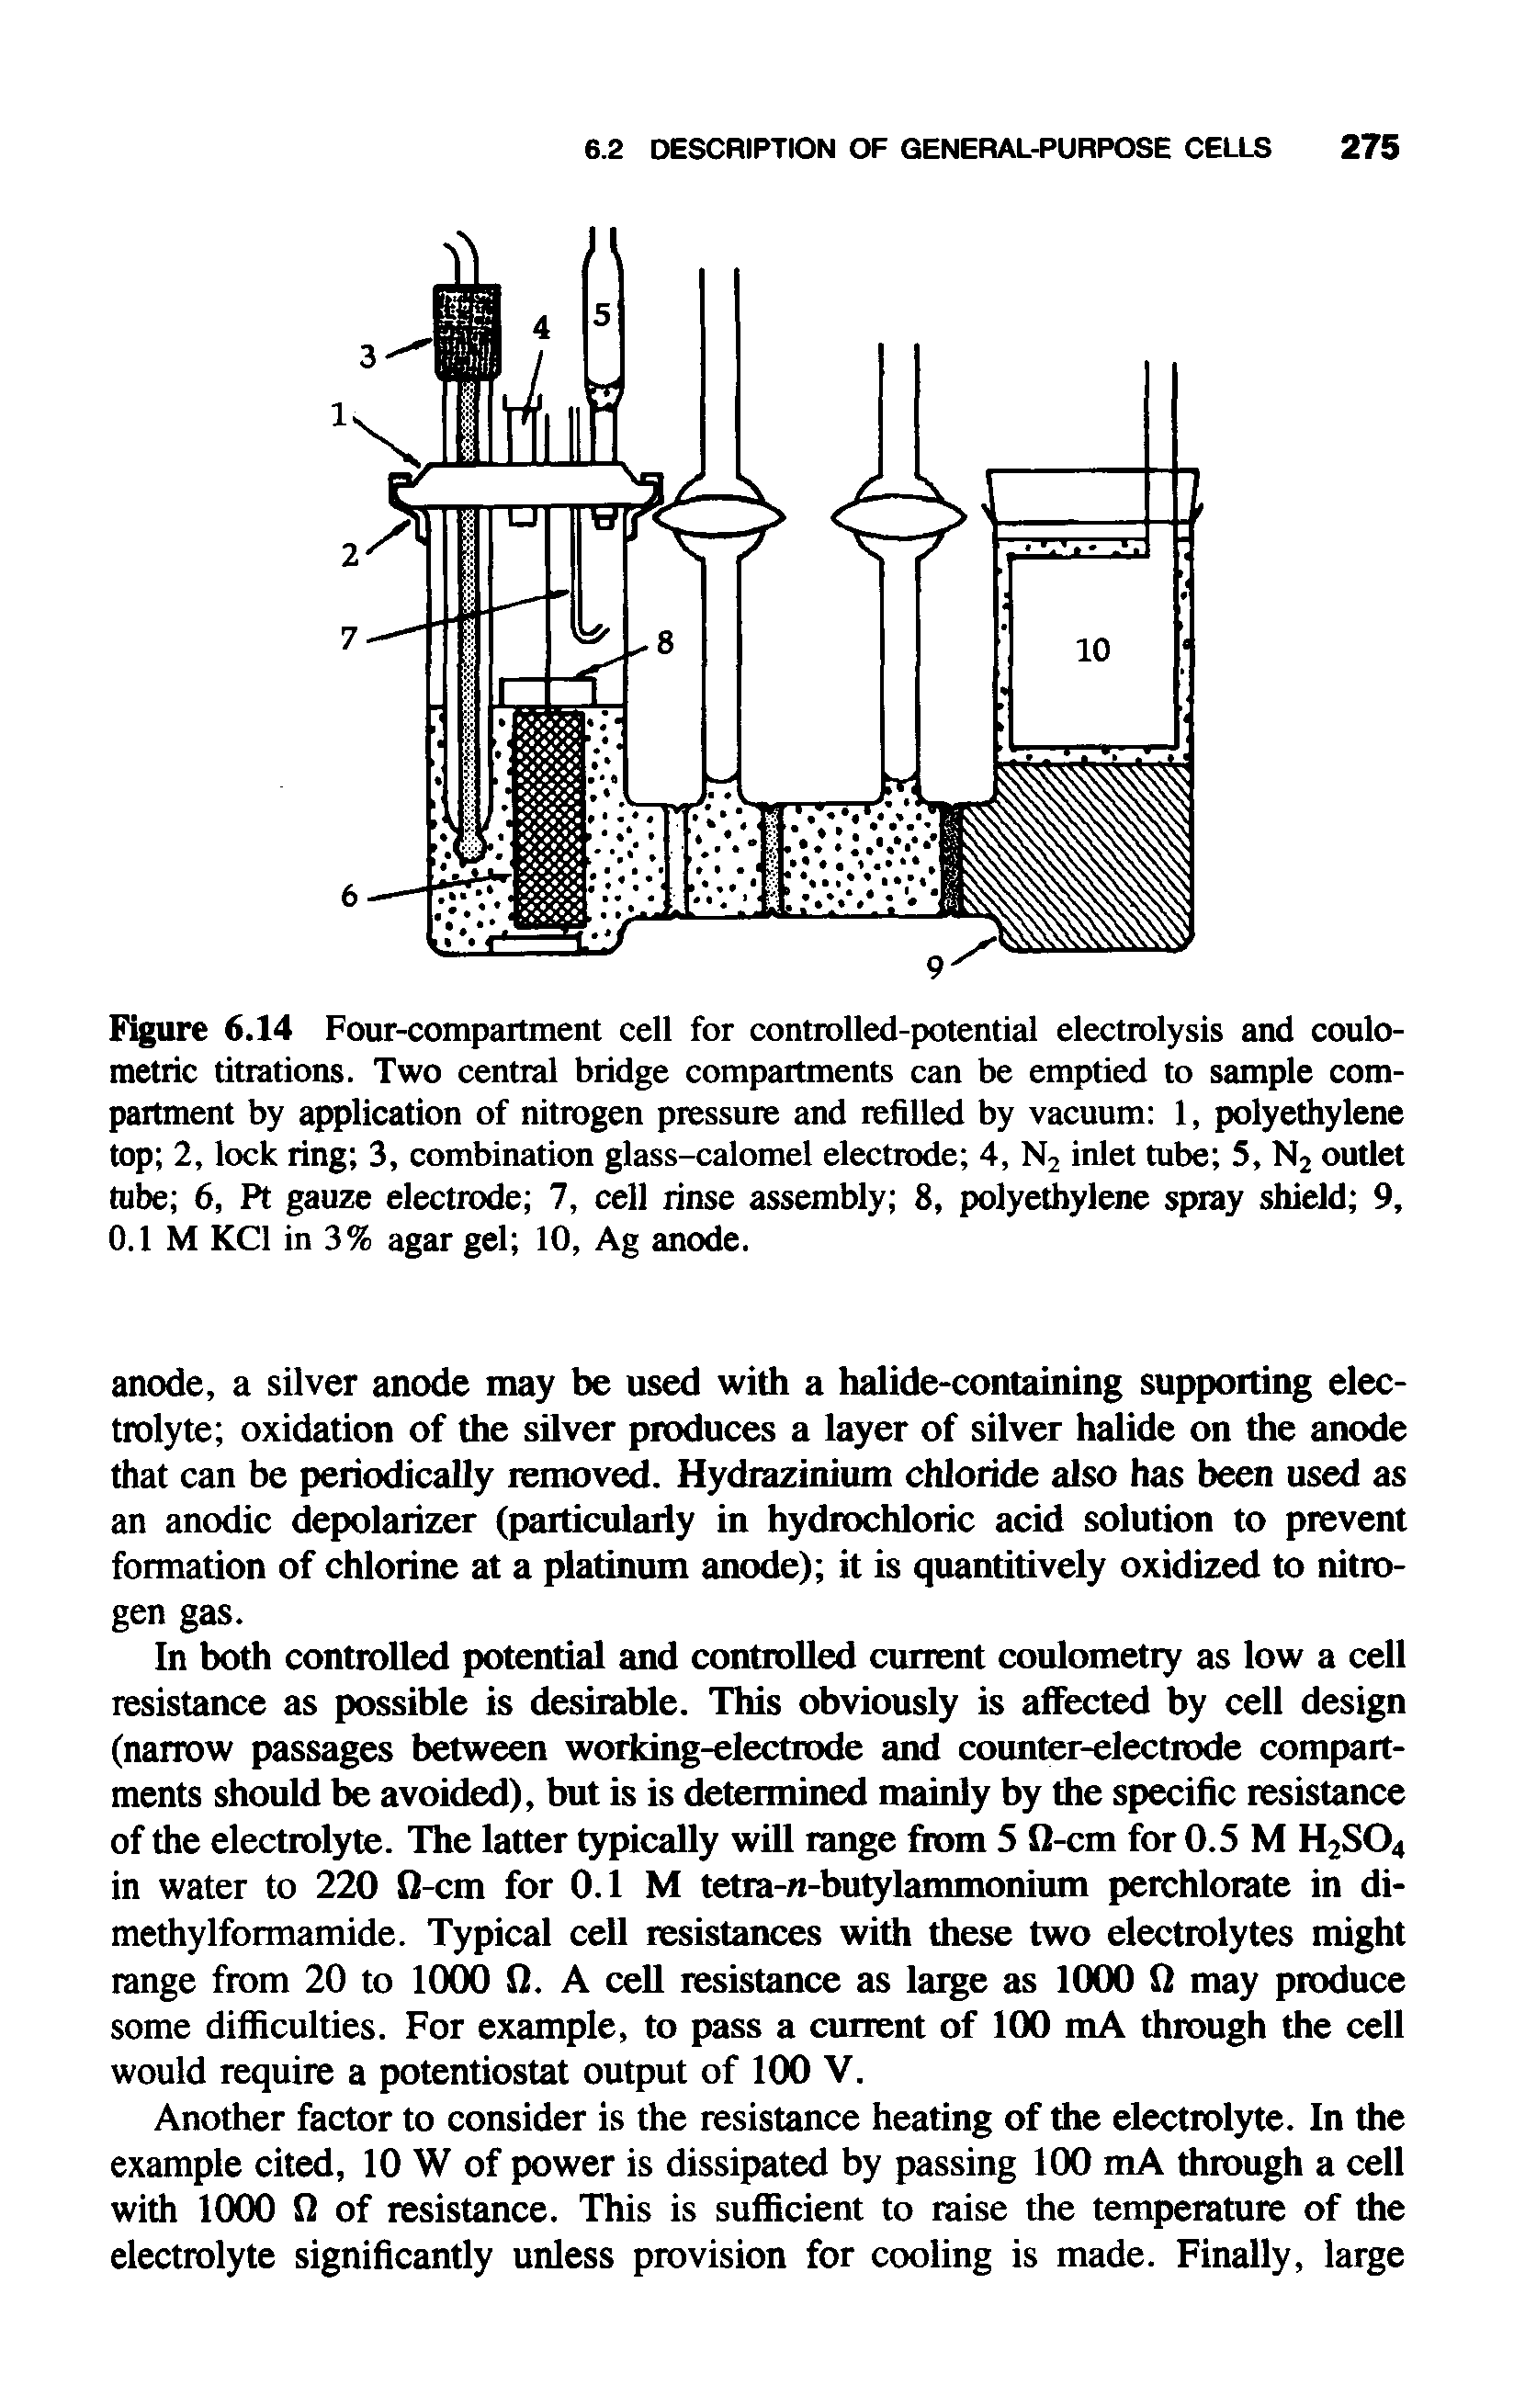 Figure 6.14 Four-compartment cell for controlled-potential electrolysis and coulo-metric titrations. Two central bridge compartments can be emptied to sample compartment by application of nitrogen pressure and refilled by vacuum 1, polyethylene top 2, lock ring 3, combination glass-calomel electrode 4, N2 inlet tube 5, N2 outlet tube 6, Pt gauze electrode 7, cell rinse assembly 8, polyethylene spray shield 9, 0.1 M KC1 in 3% agar gel 10, Ag anode.